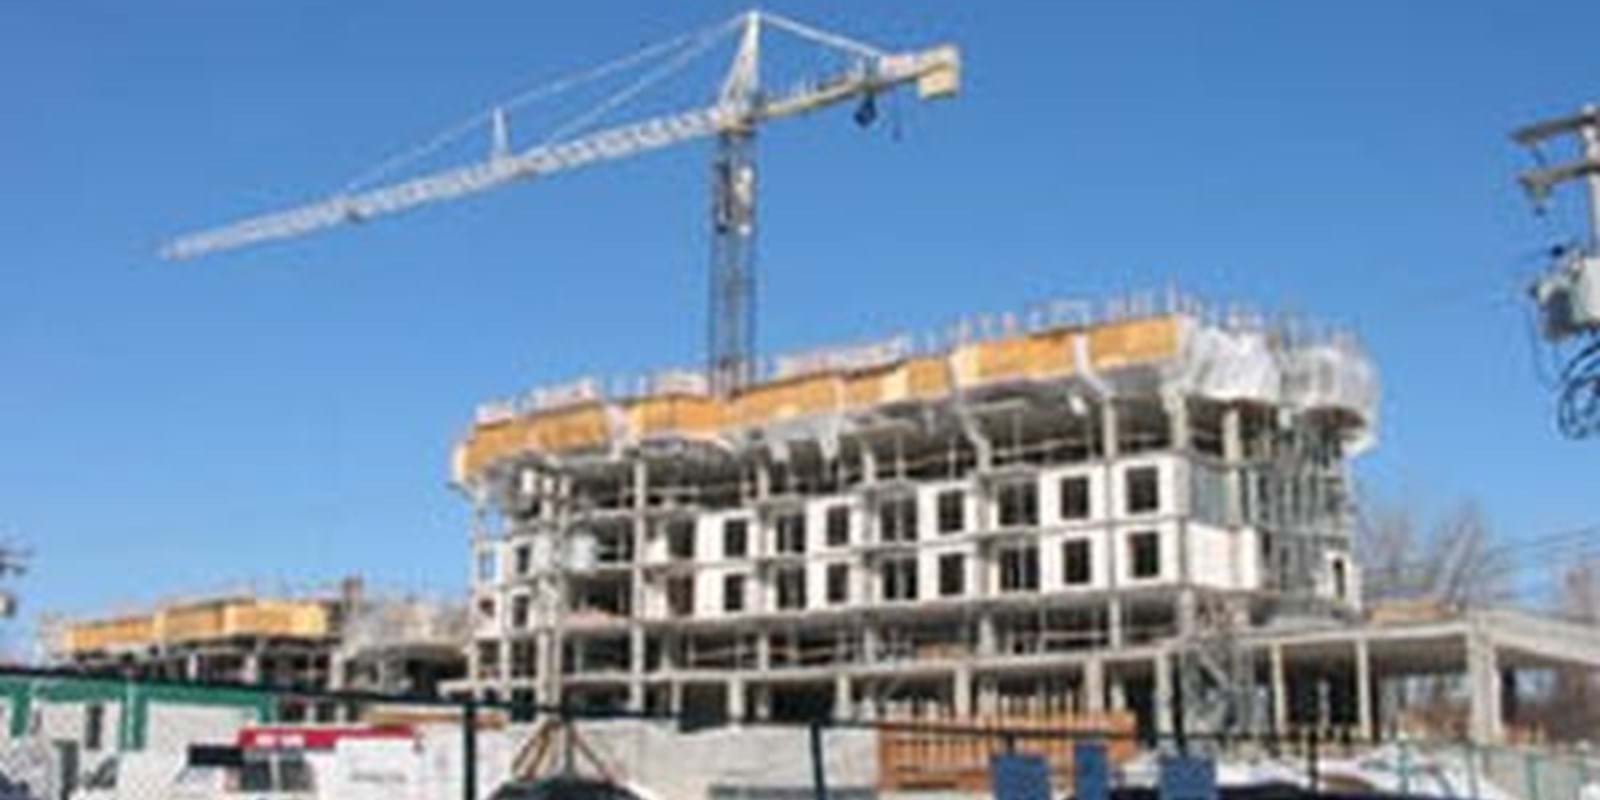 Construction intentions in Canada cooled for a fourth consecutive month